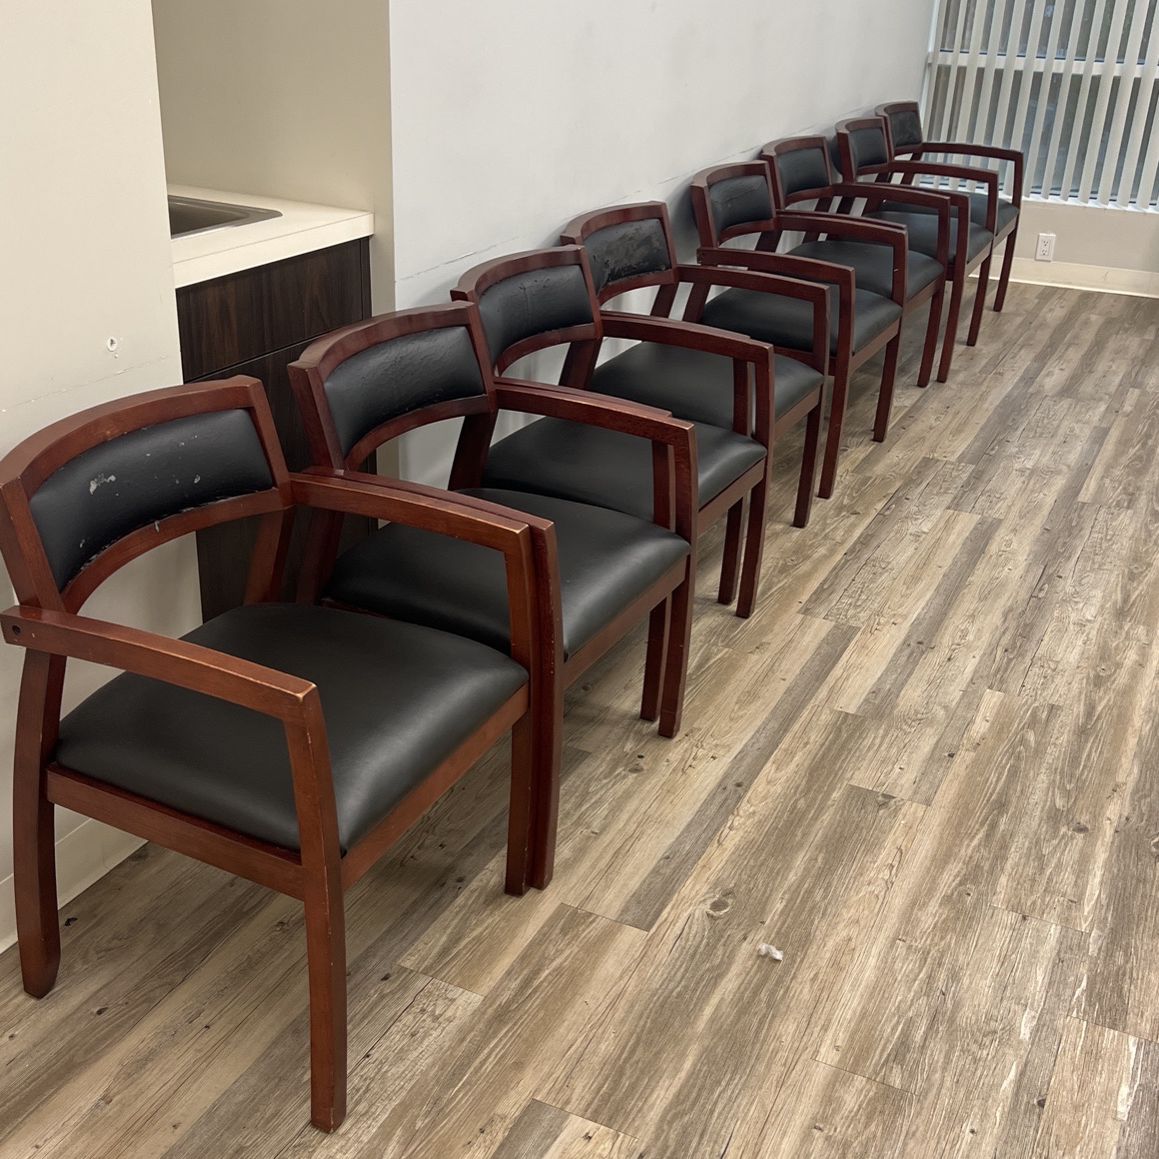 10 Office Chairs For Free 